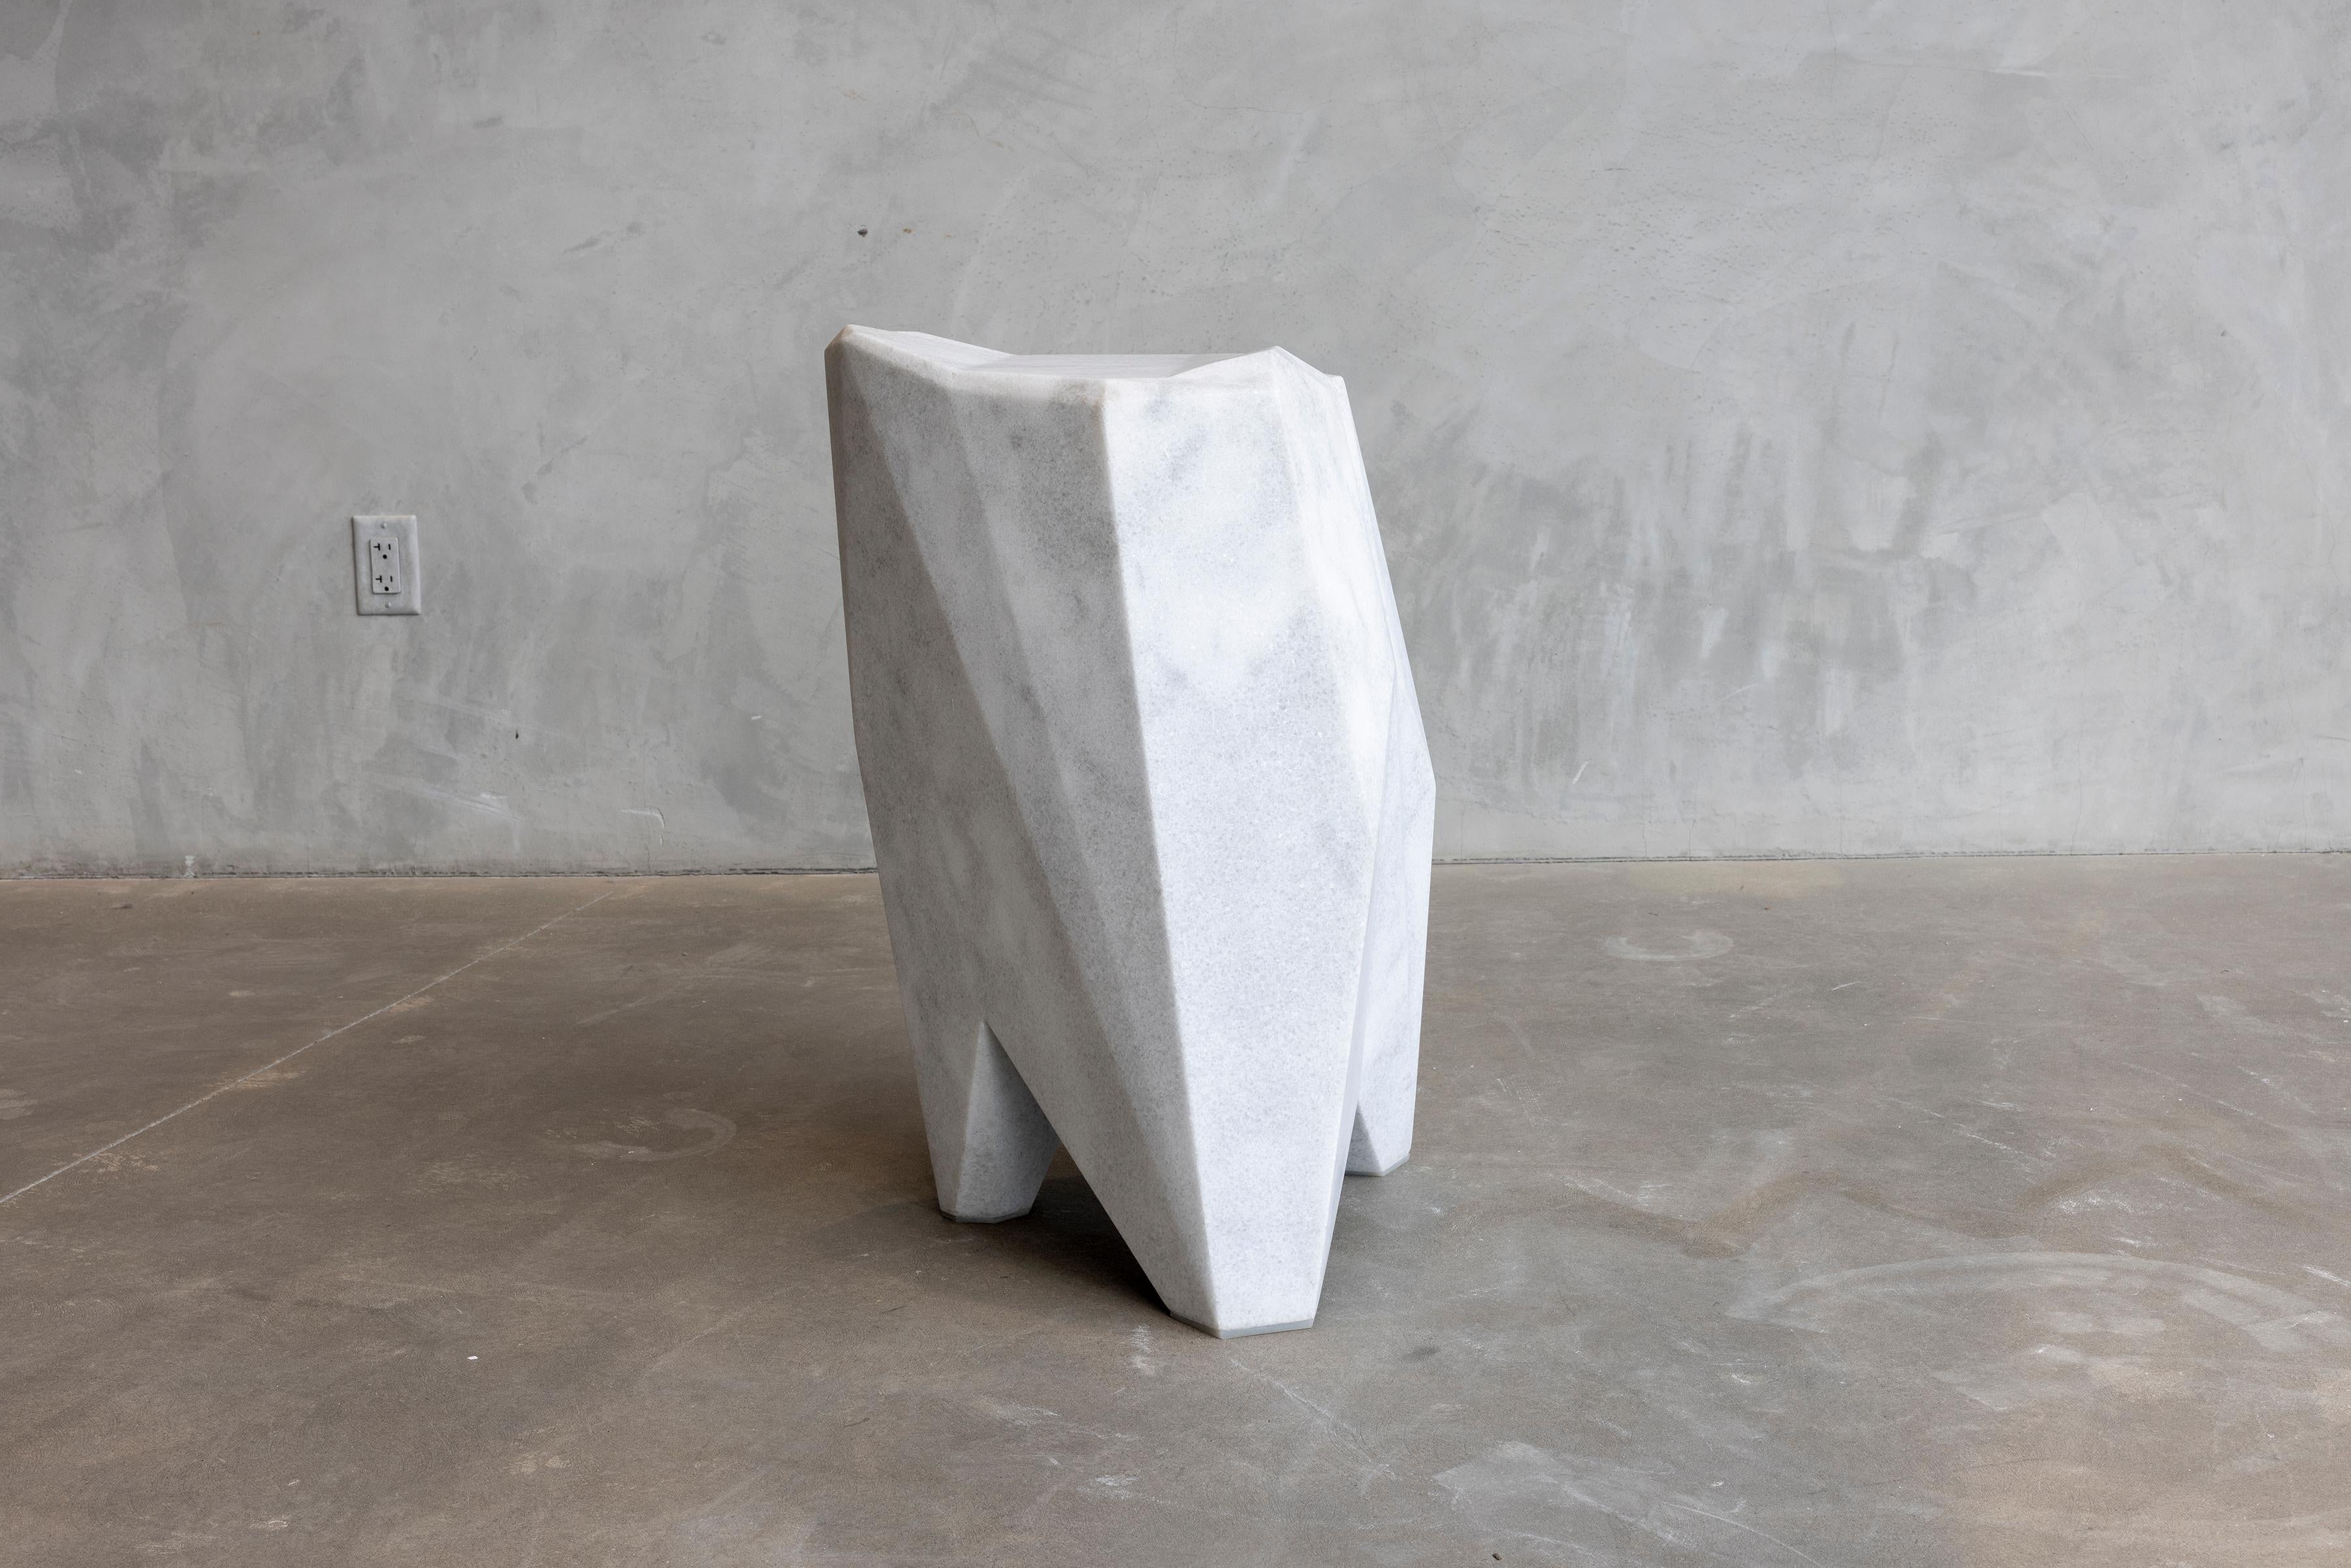 The Floe Stool by William Emmerson
Limited Edition Of 2 Pieces.
Dimensions: D 16.75 x W 20 x H 29.25 cm.
Materials: Naxos marble.
 
A shape. A floating mass of white marble turned into a piece of functional sculpture representing the beauty behind